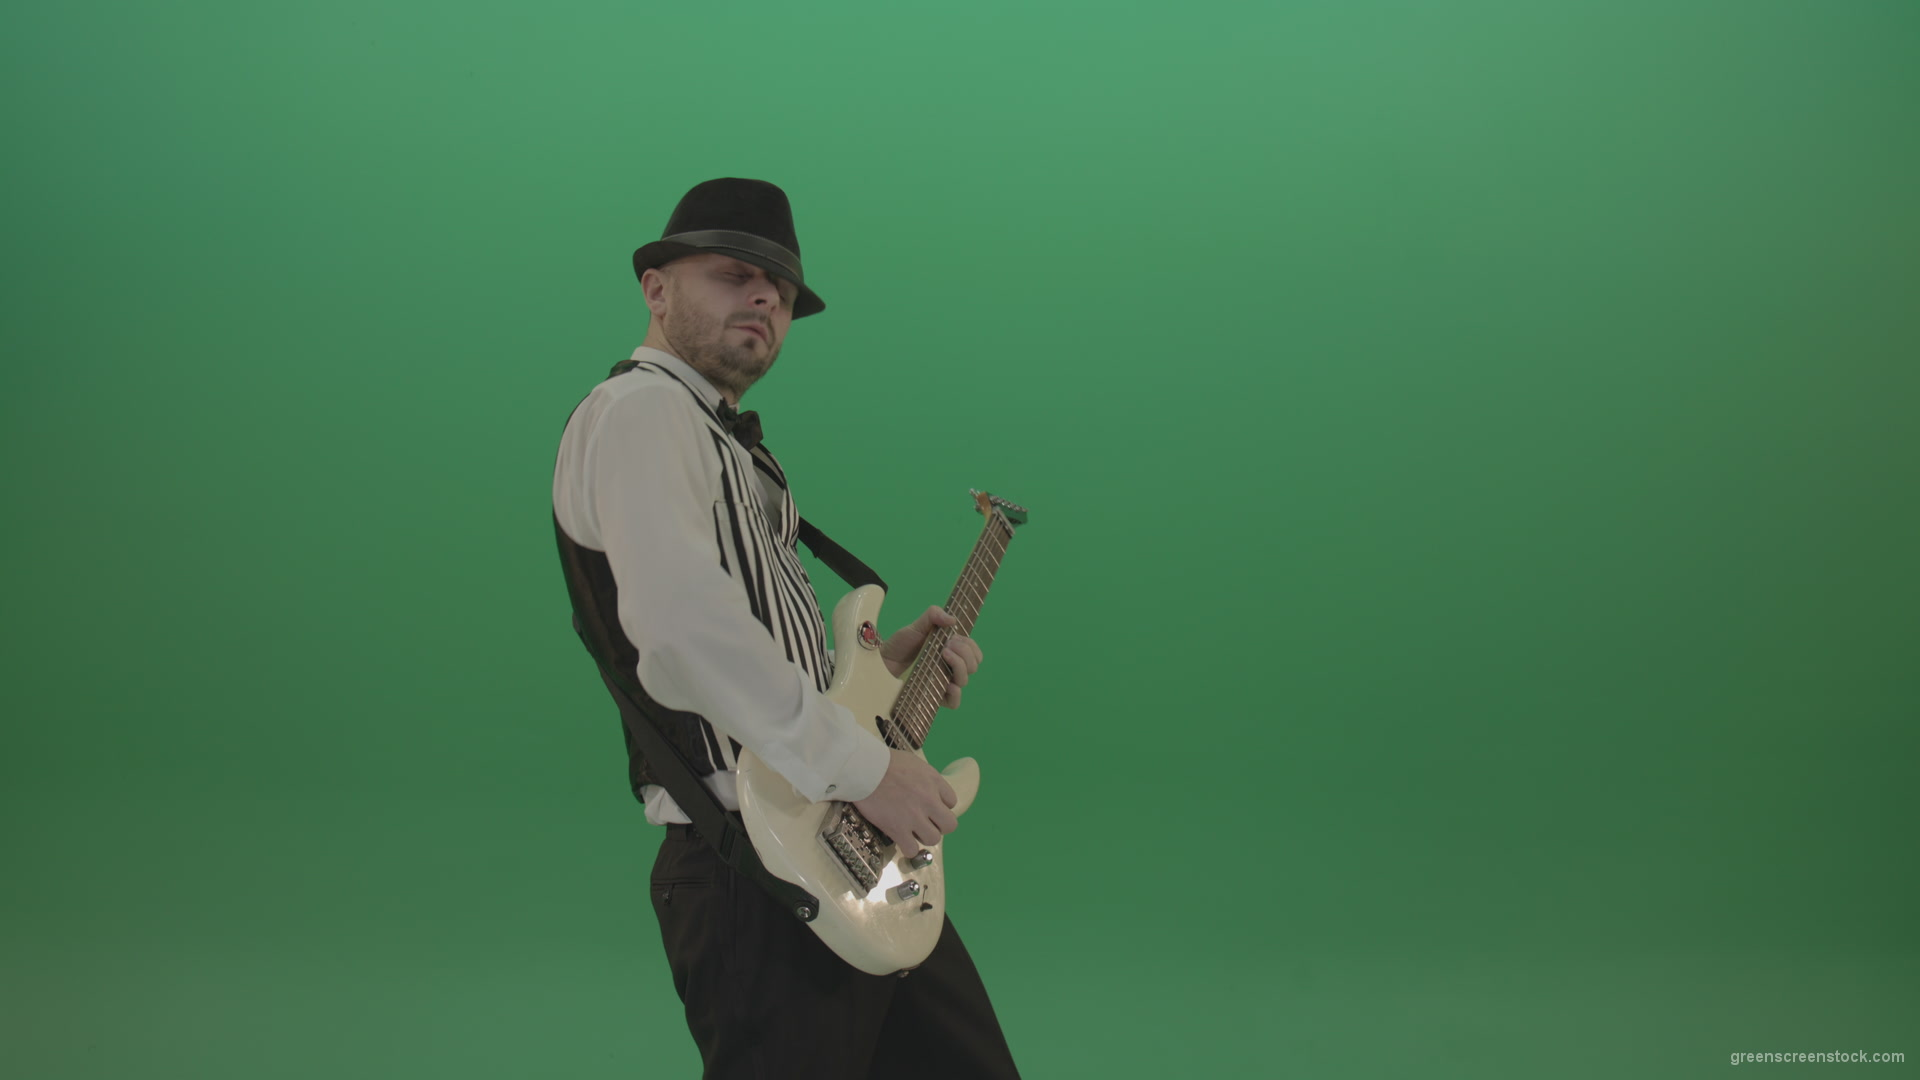 Classic-jazz-guitarist-play-white-electro-guitar-solo-music-on-green-screen_002 Green Screen Stock